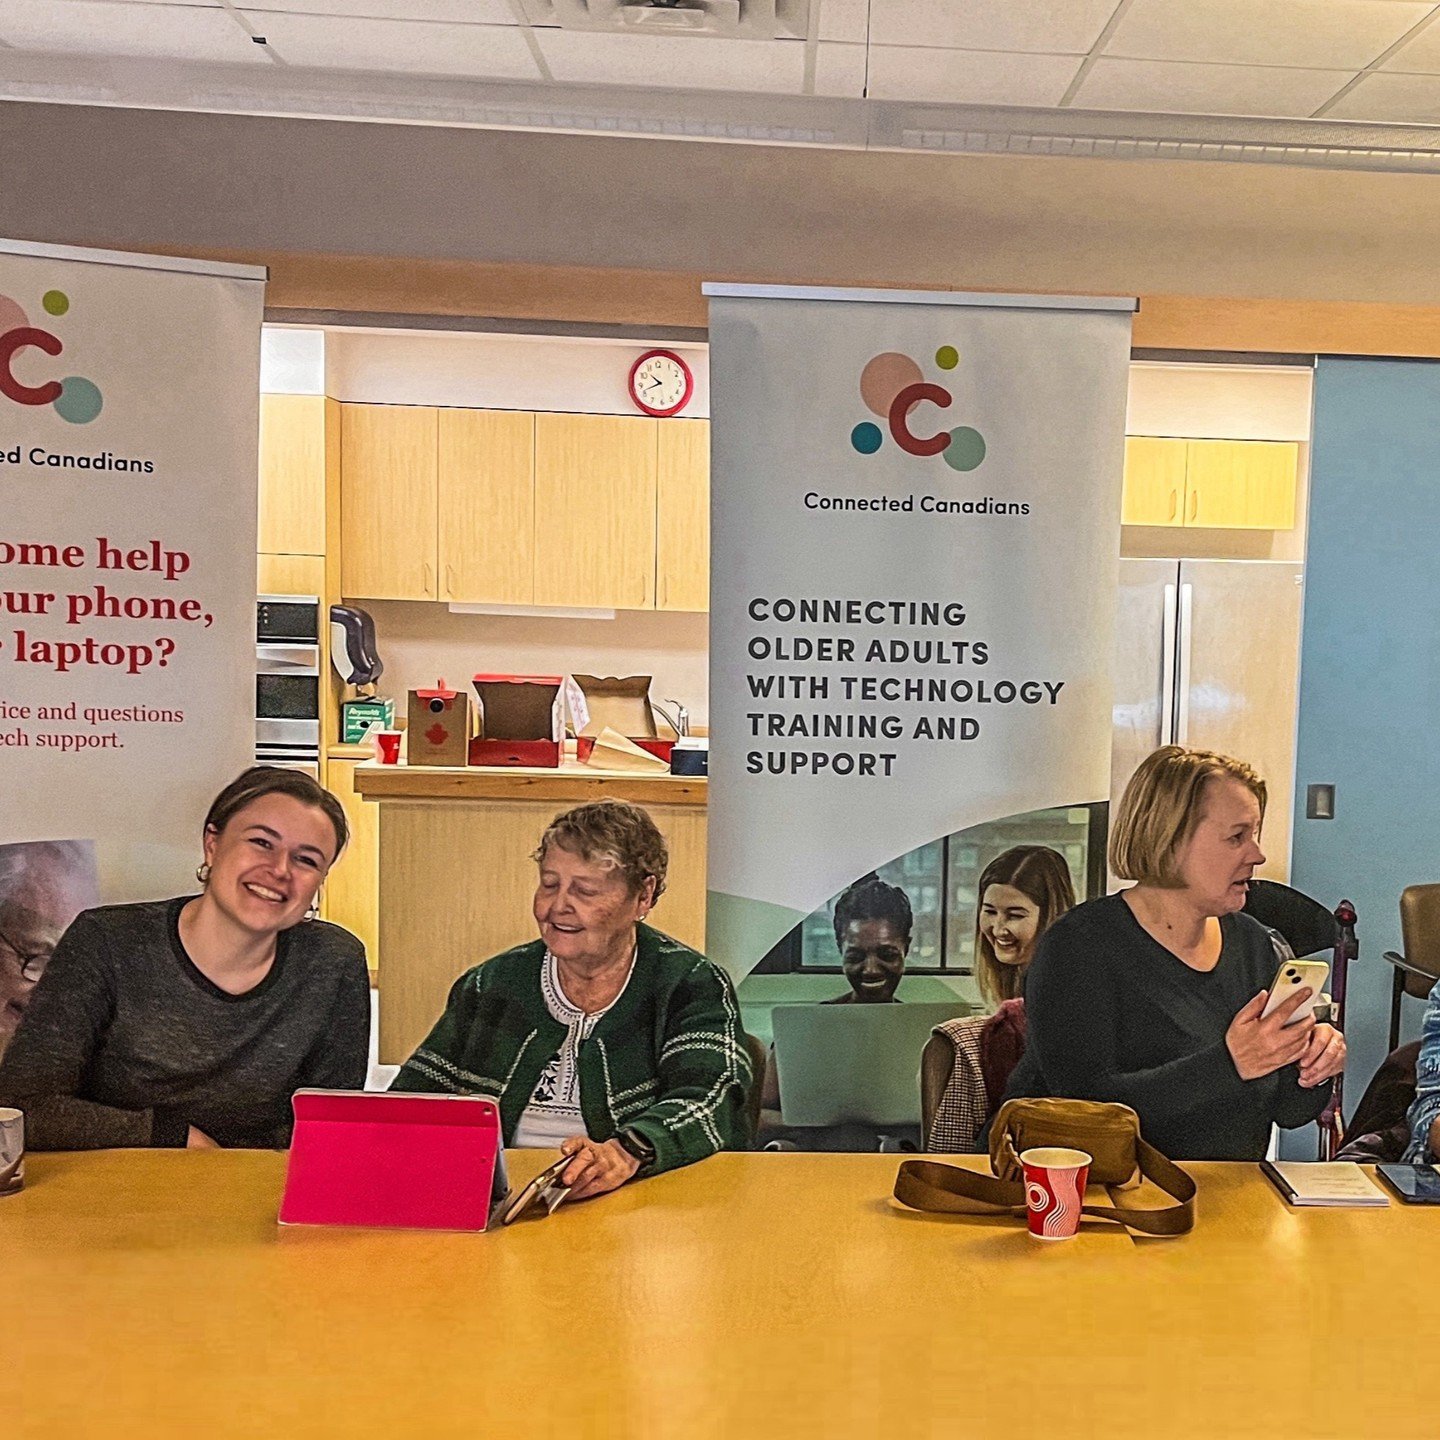 We had an amazing digital literacy workshop at @perleyhealth this month with our fantastic @adobe workplace volunteers! Thanks so much to all of the lovely Adobe team who came out and helped to ensure older Canadians at Perley Health stay connected, 